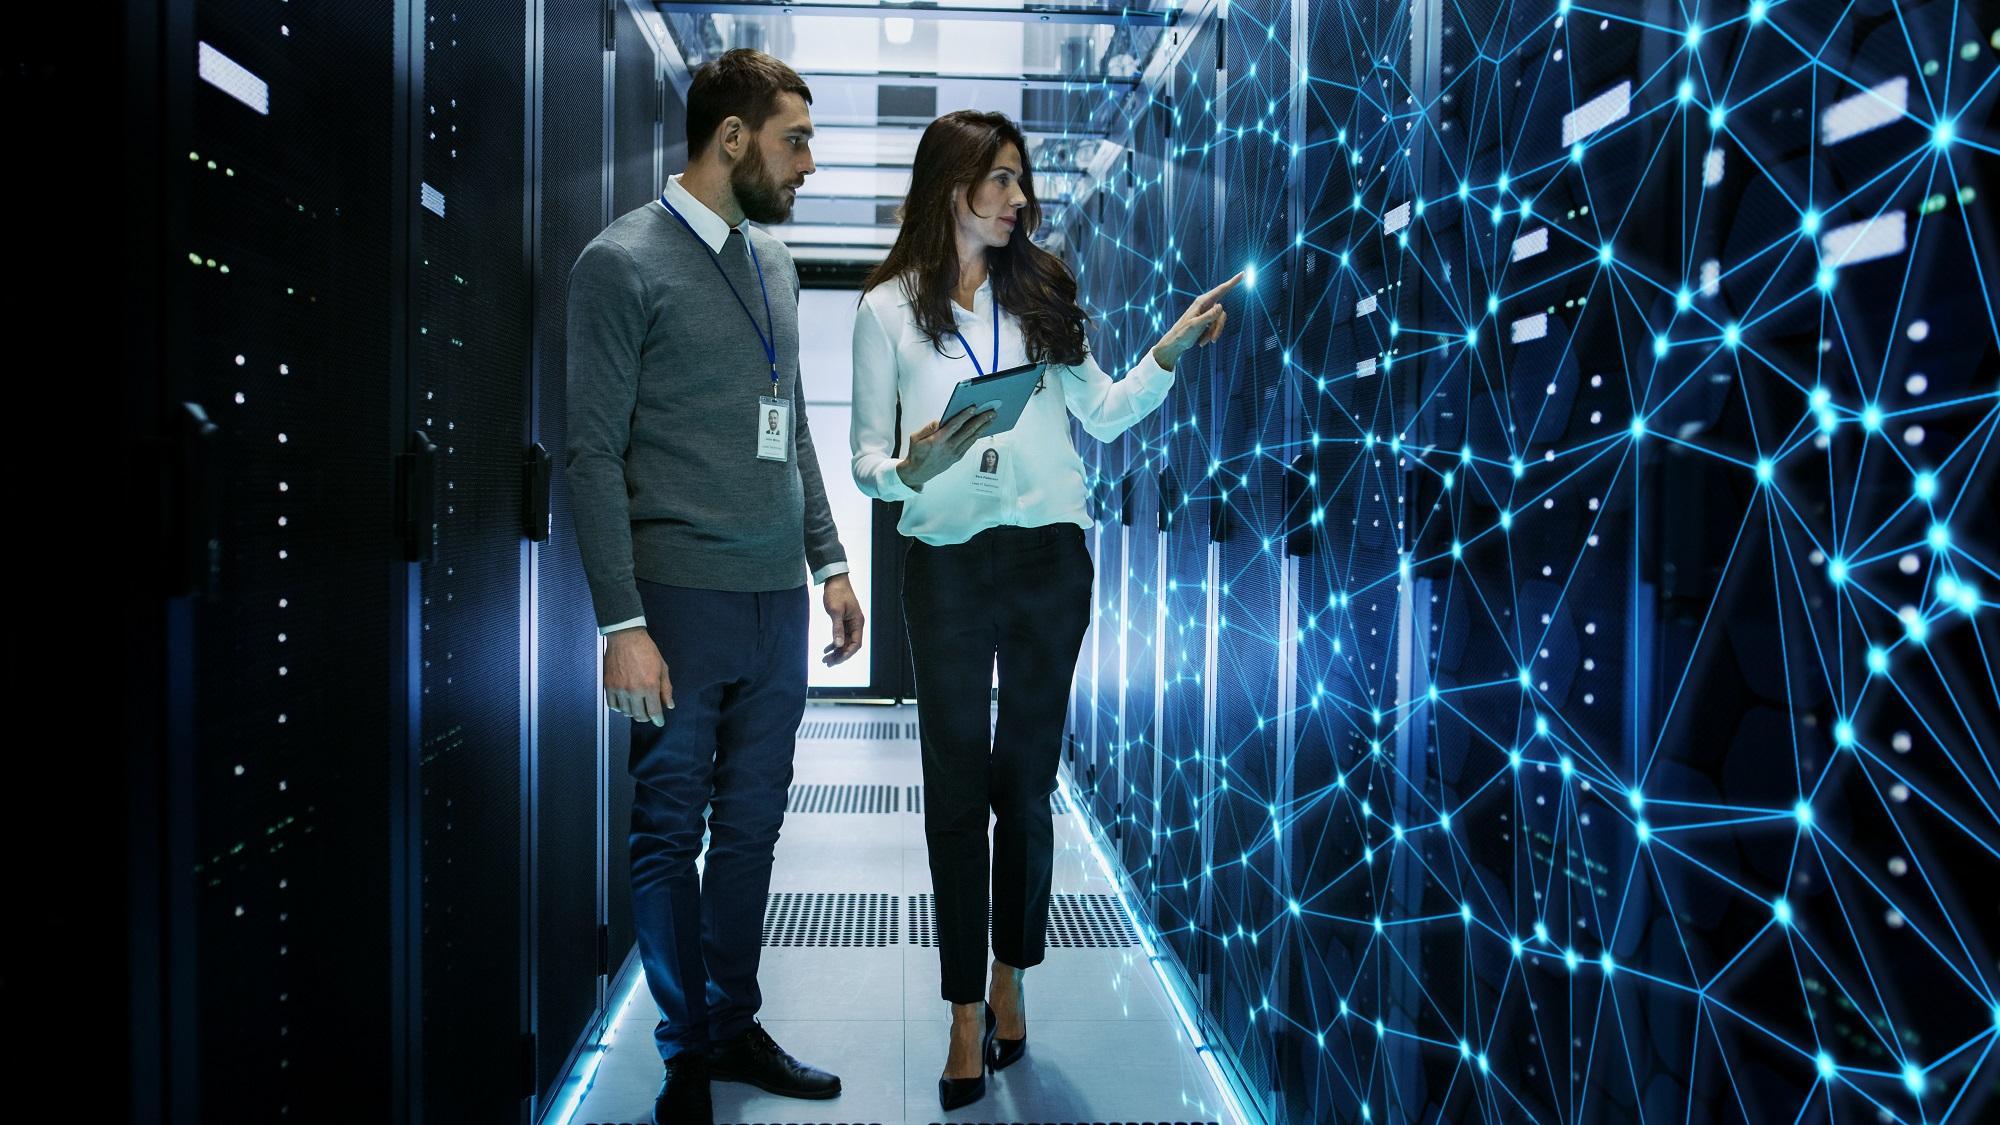 two people in an aisle between computing racks, pointing at interconnected dots overlaid on a supercomputer